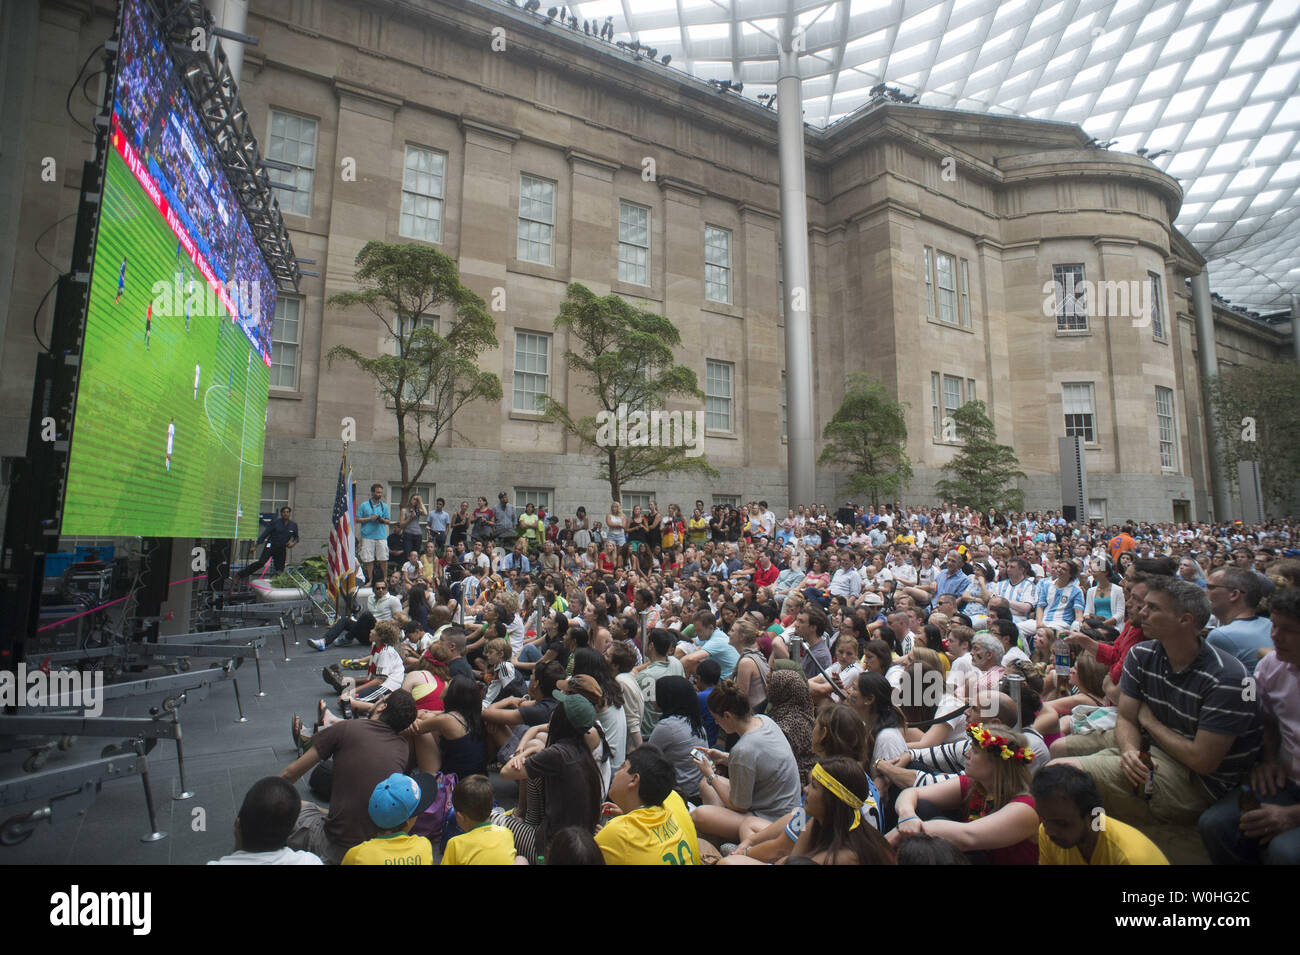 Fans gather to watch the 2014 World Cup final between Germany and Argentina during a watch party held at the Smithsonian Portrait Gallery, in Washington, D.C. on July 13, 2014.  UPI/Kevin Dietsch Stock Photo